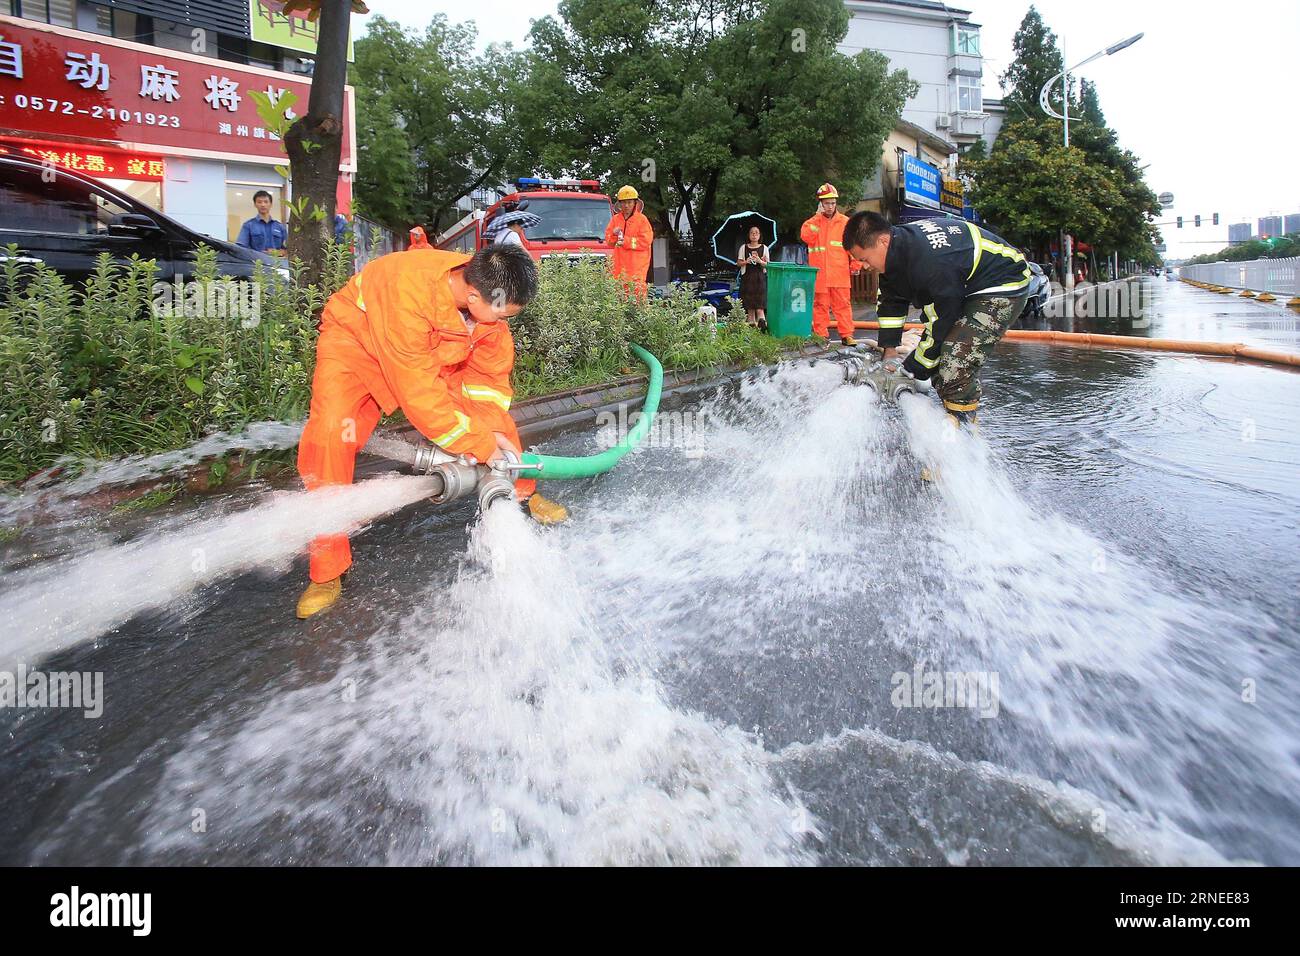 (160620) -- HUZHOU, June 20, 2016 -- Firefighters drain water on a road in Huzhou, east China s Zhejiang Province, June 20, 2016. Torrential rain hit the city Sunday evening, causing waterlogging in downtown areas. The daily precipitation set a new record with 227.2 millimeters by 6 p.m. Monday. )(mcg) CHINA-ZHEJIANG-HUZHOU-TORRENTIAL RAIN (CN) ZhangxJian PUBLICATIONxNOTxINxCHN   160620 Huzhou June 20 2016 Firefighters Drain Water ON a Road in Huzhou East China S Zhejiang Province June 20 2016 torrential Rain Hit The City Sunday evening causing waterlogging in Downtown Areas The Daily precipit Stock Photo